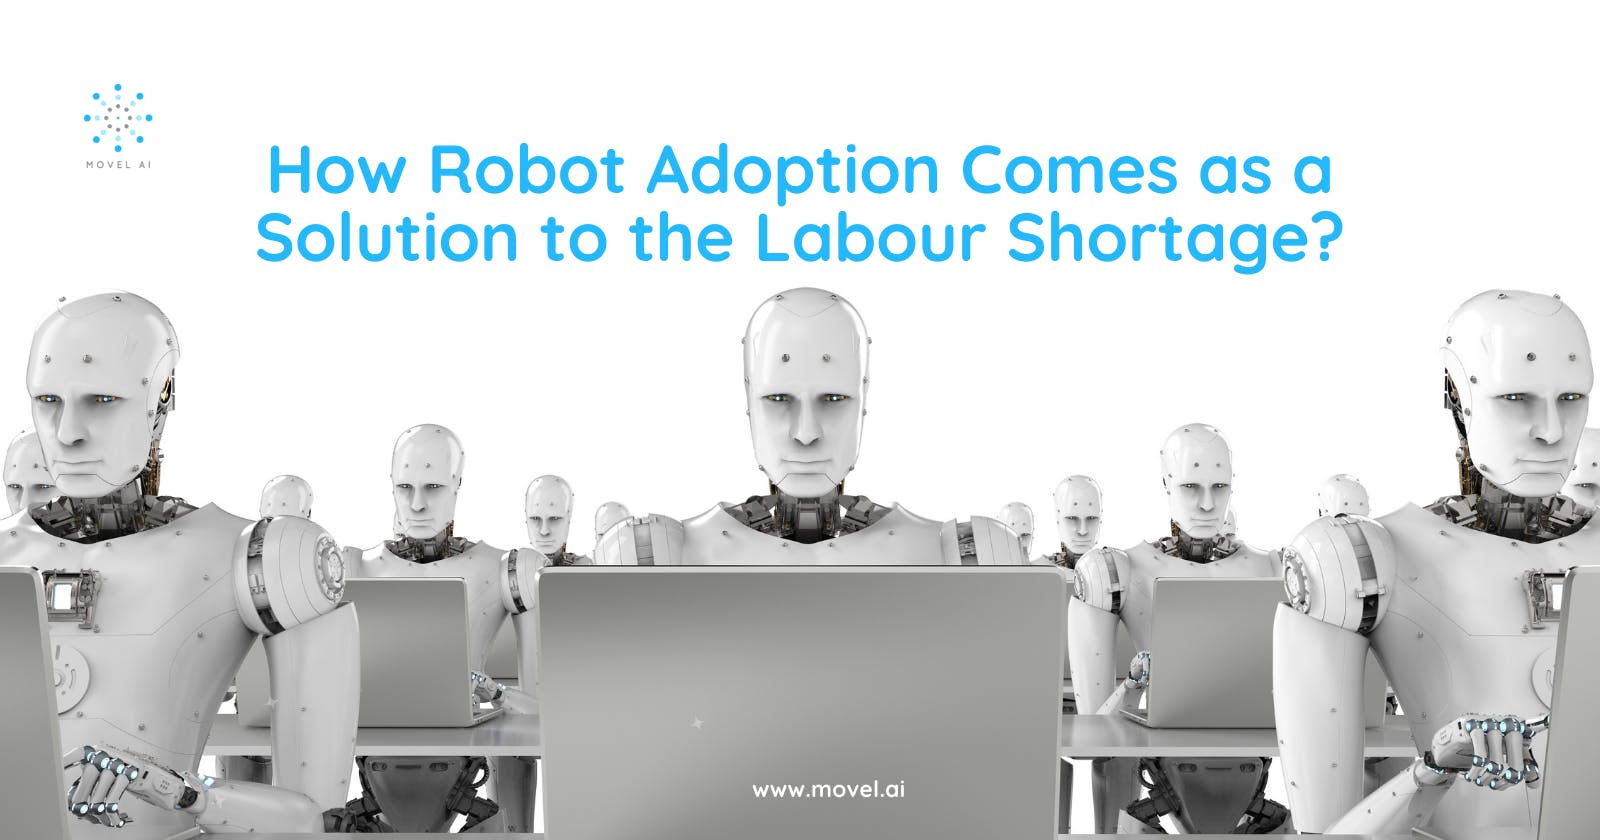 How Robot Adoption Comes as a Solution to the Labour Shortage?